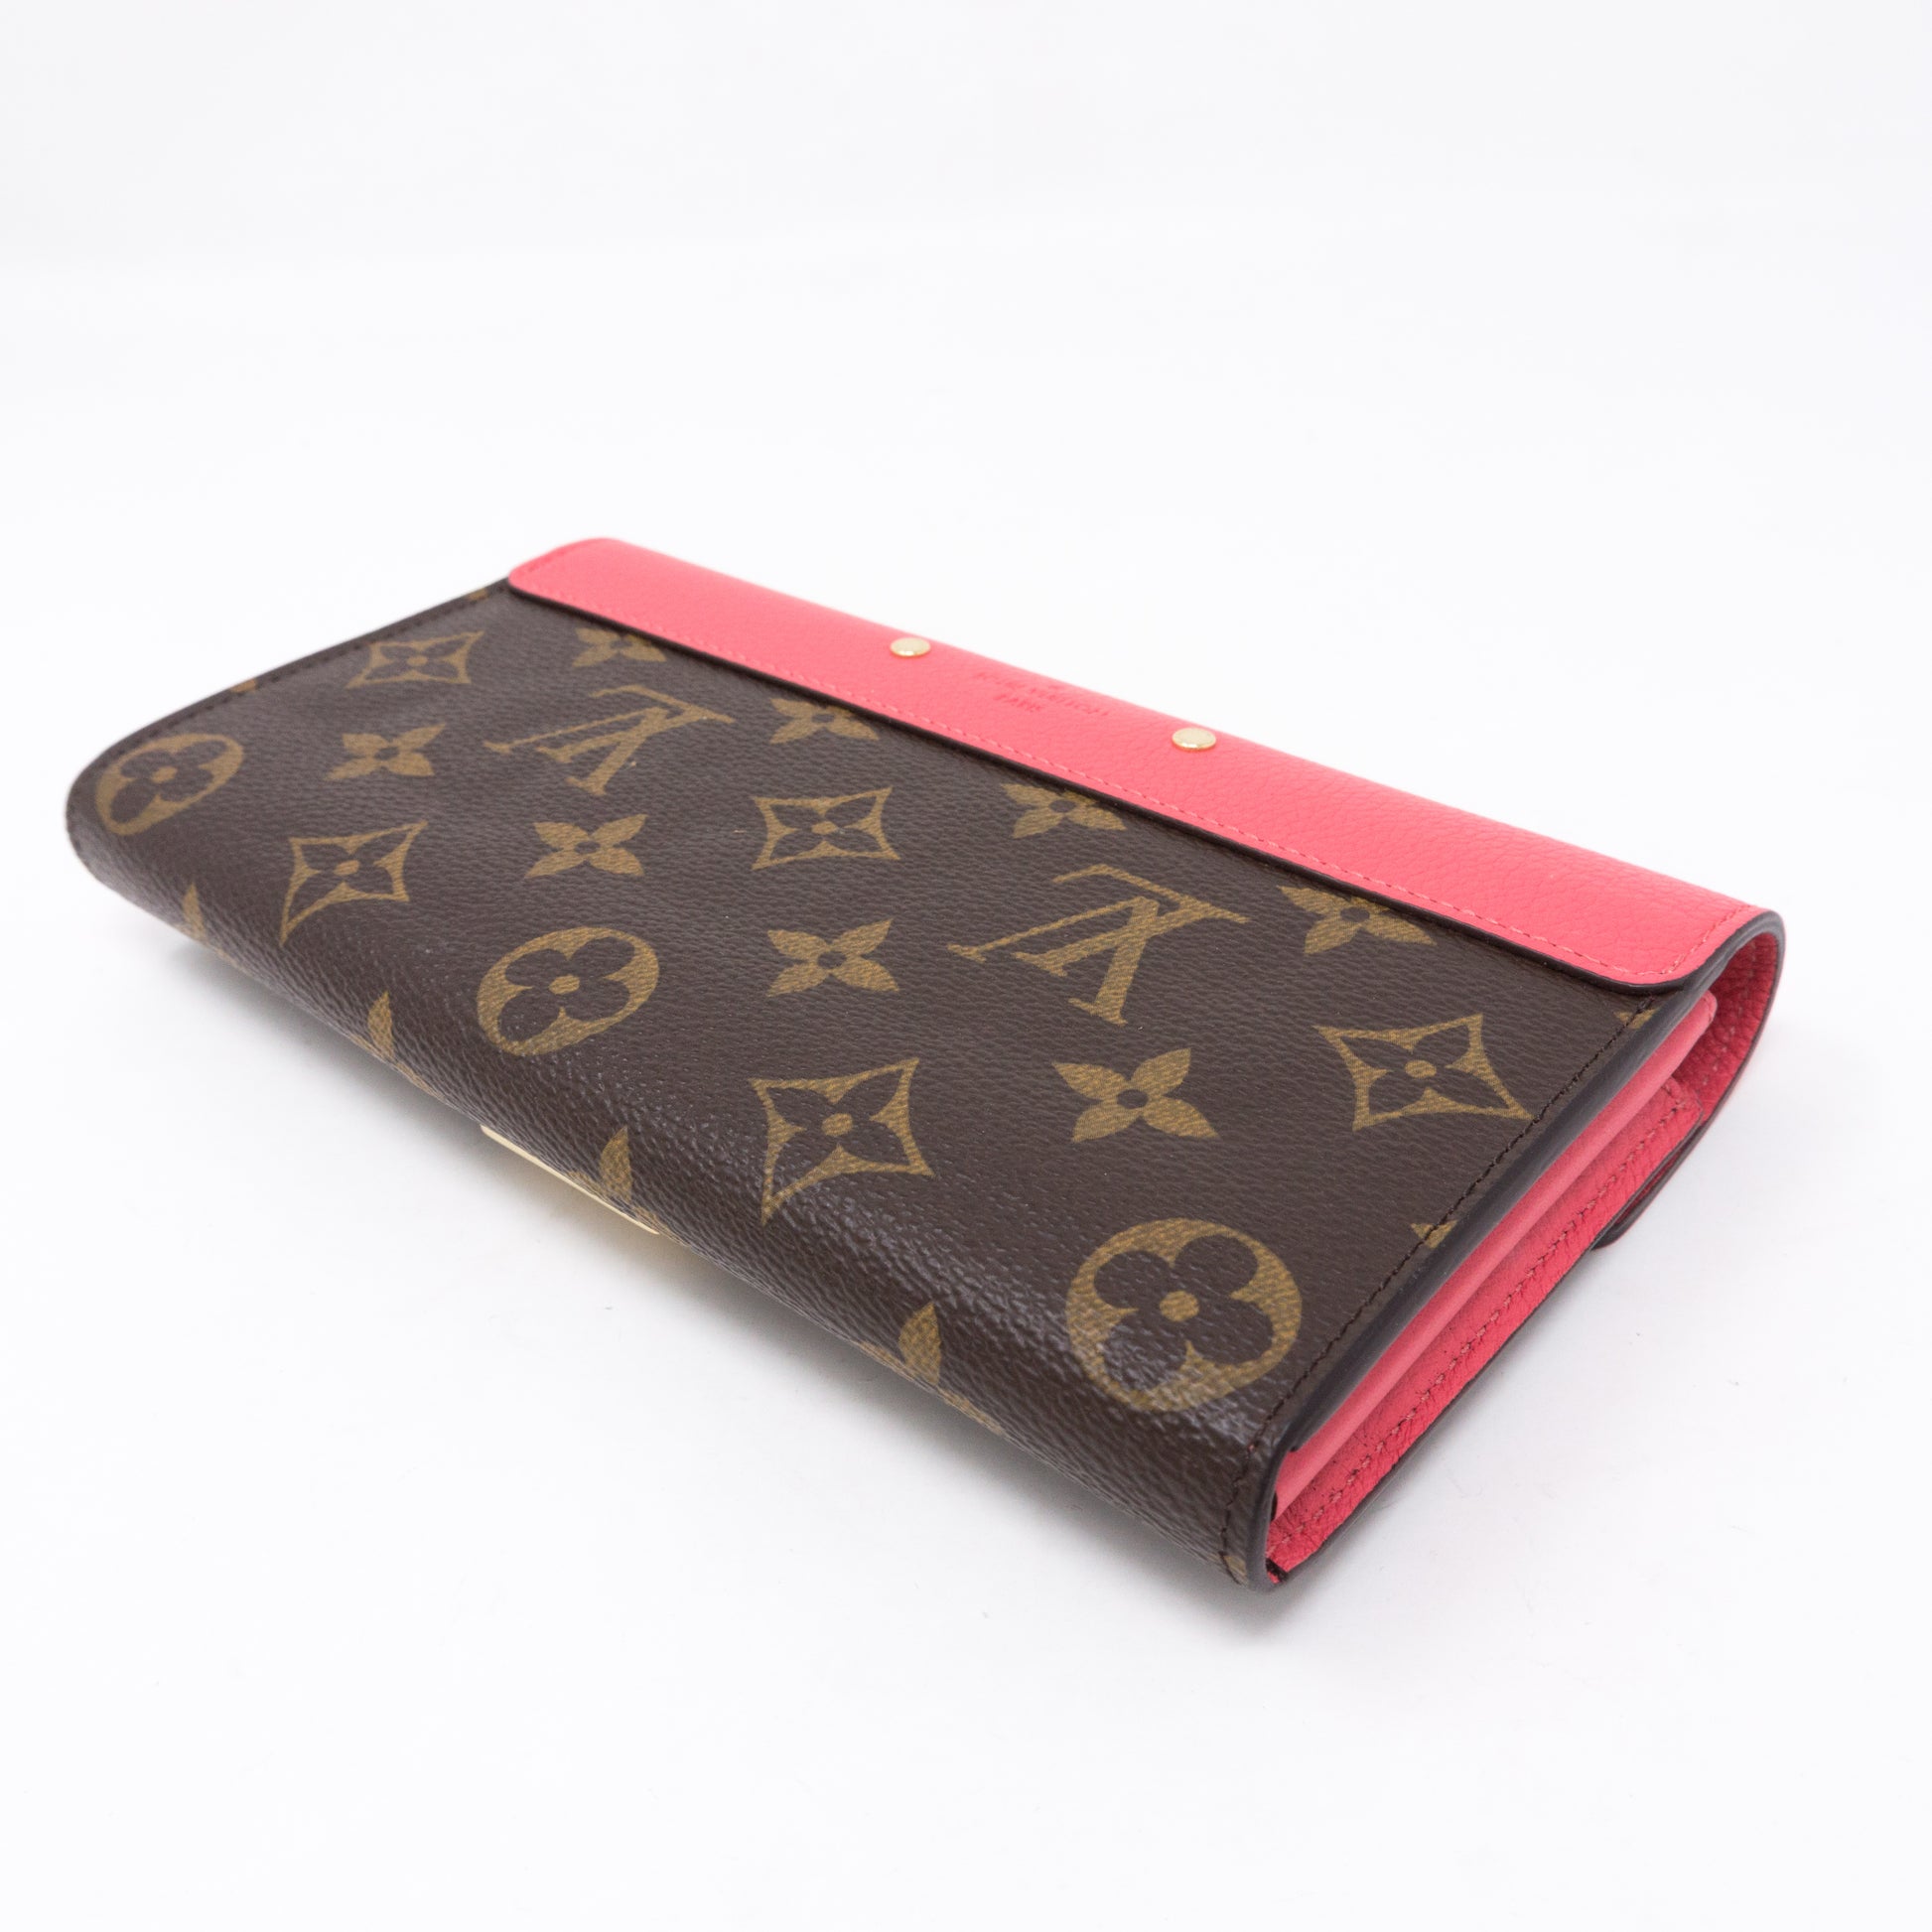 LULUX-The Luxury Hub - Louis Vuitton LV Women Pallas Compact Wallet In  Monogram Canvas With Colored Calf Leather  vuitton-lv-women-pallas-compact-wallet-in-monogram-canvas-with-colored-calf-leather/